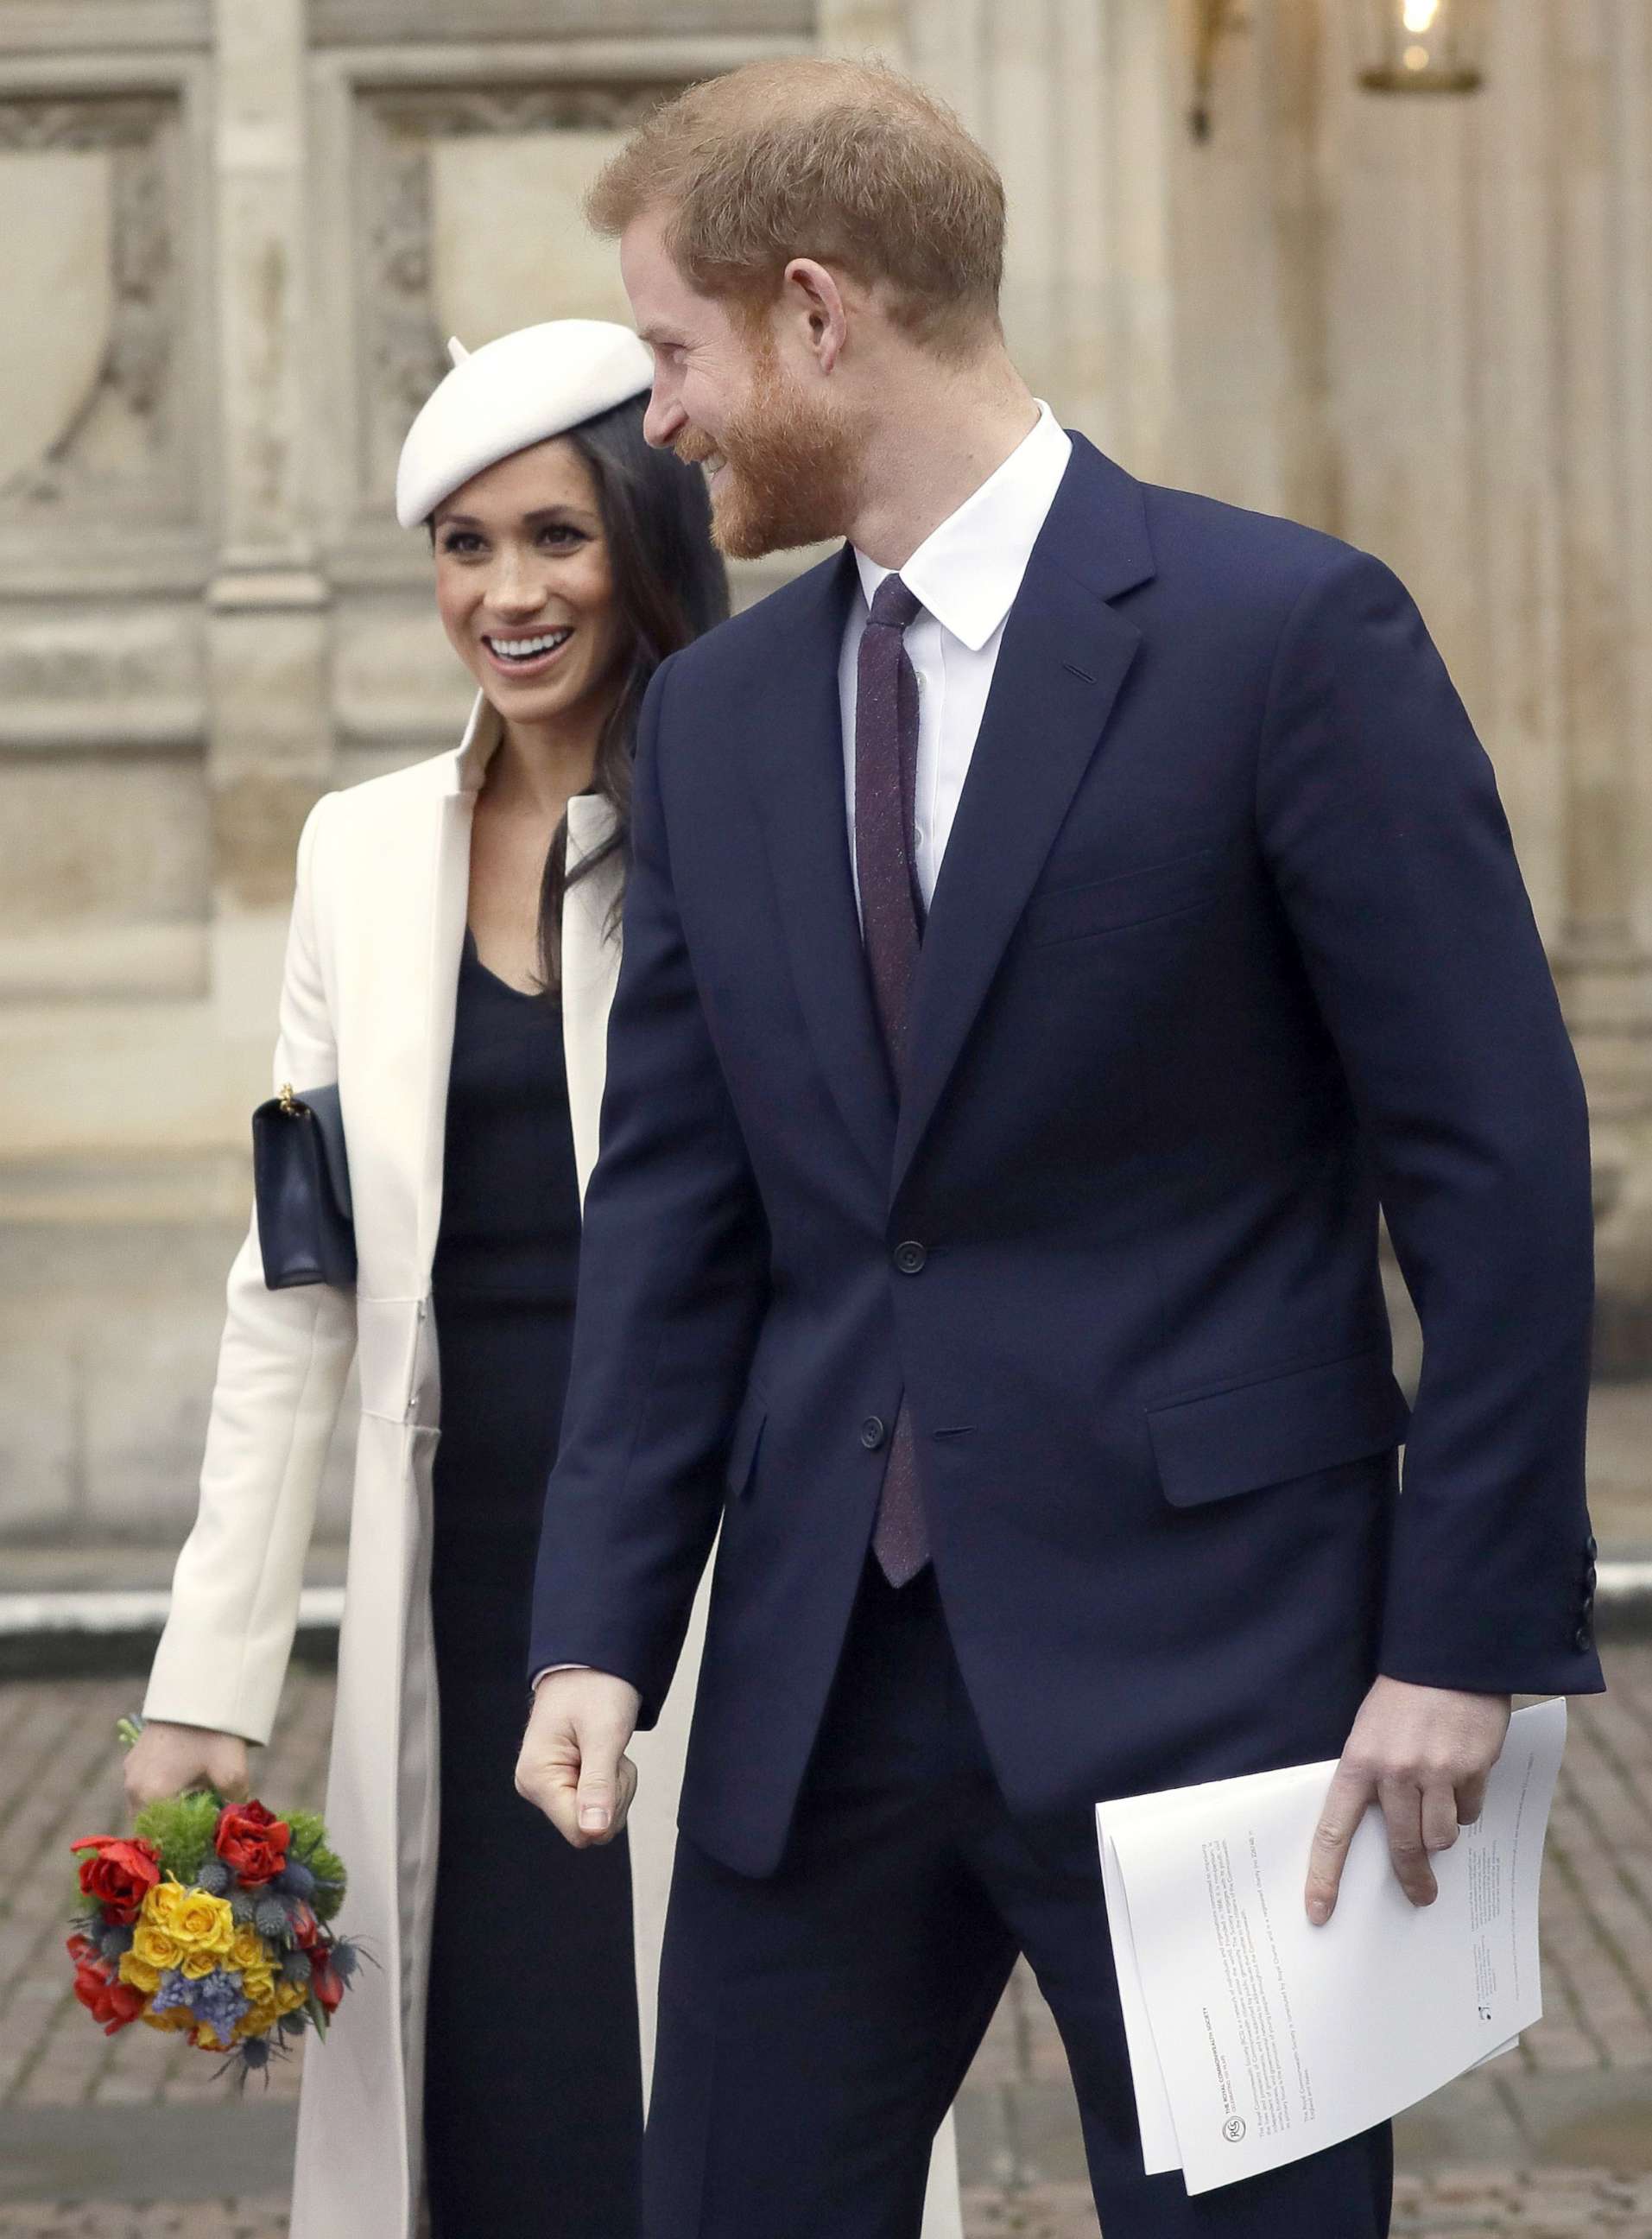 PHOTO: Britain's Prince Harry leaves with his fiancee, U.S. actress Meghan Markle after attending a Commonwealth Day Service at Westminster Abbey in central London, March 12, 2018.
